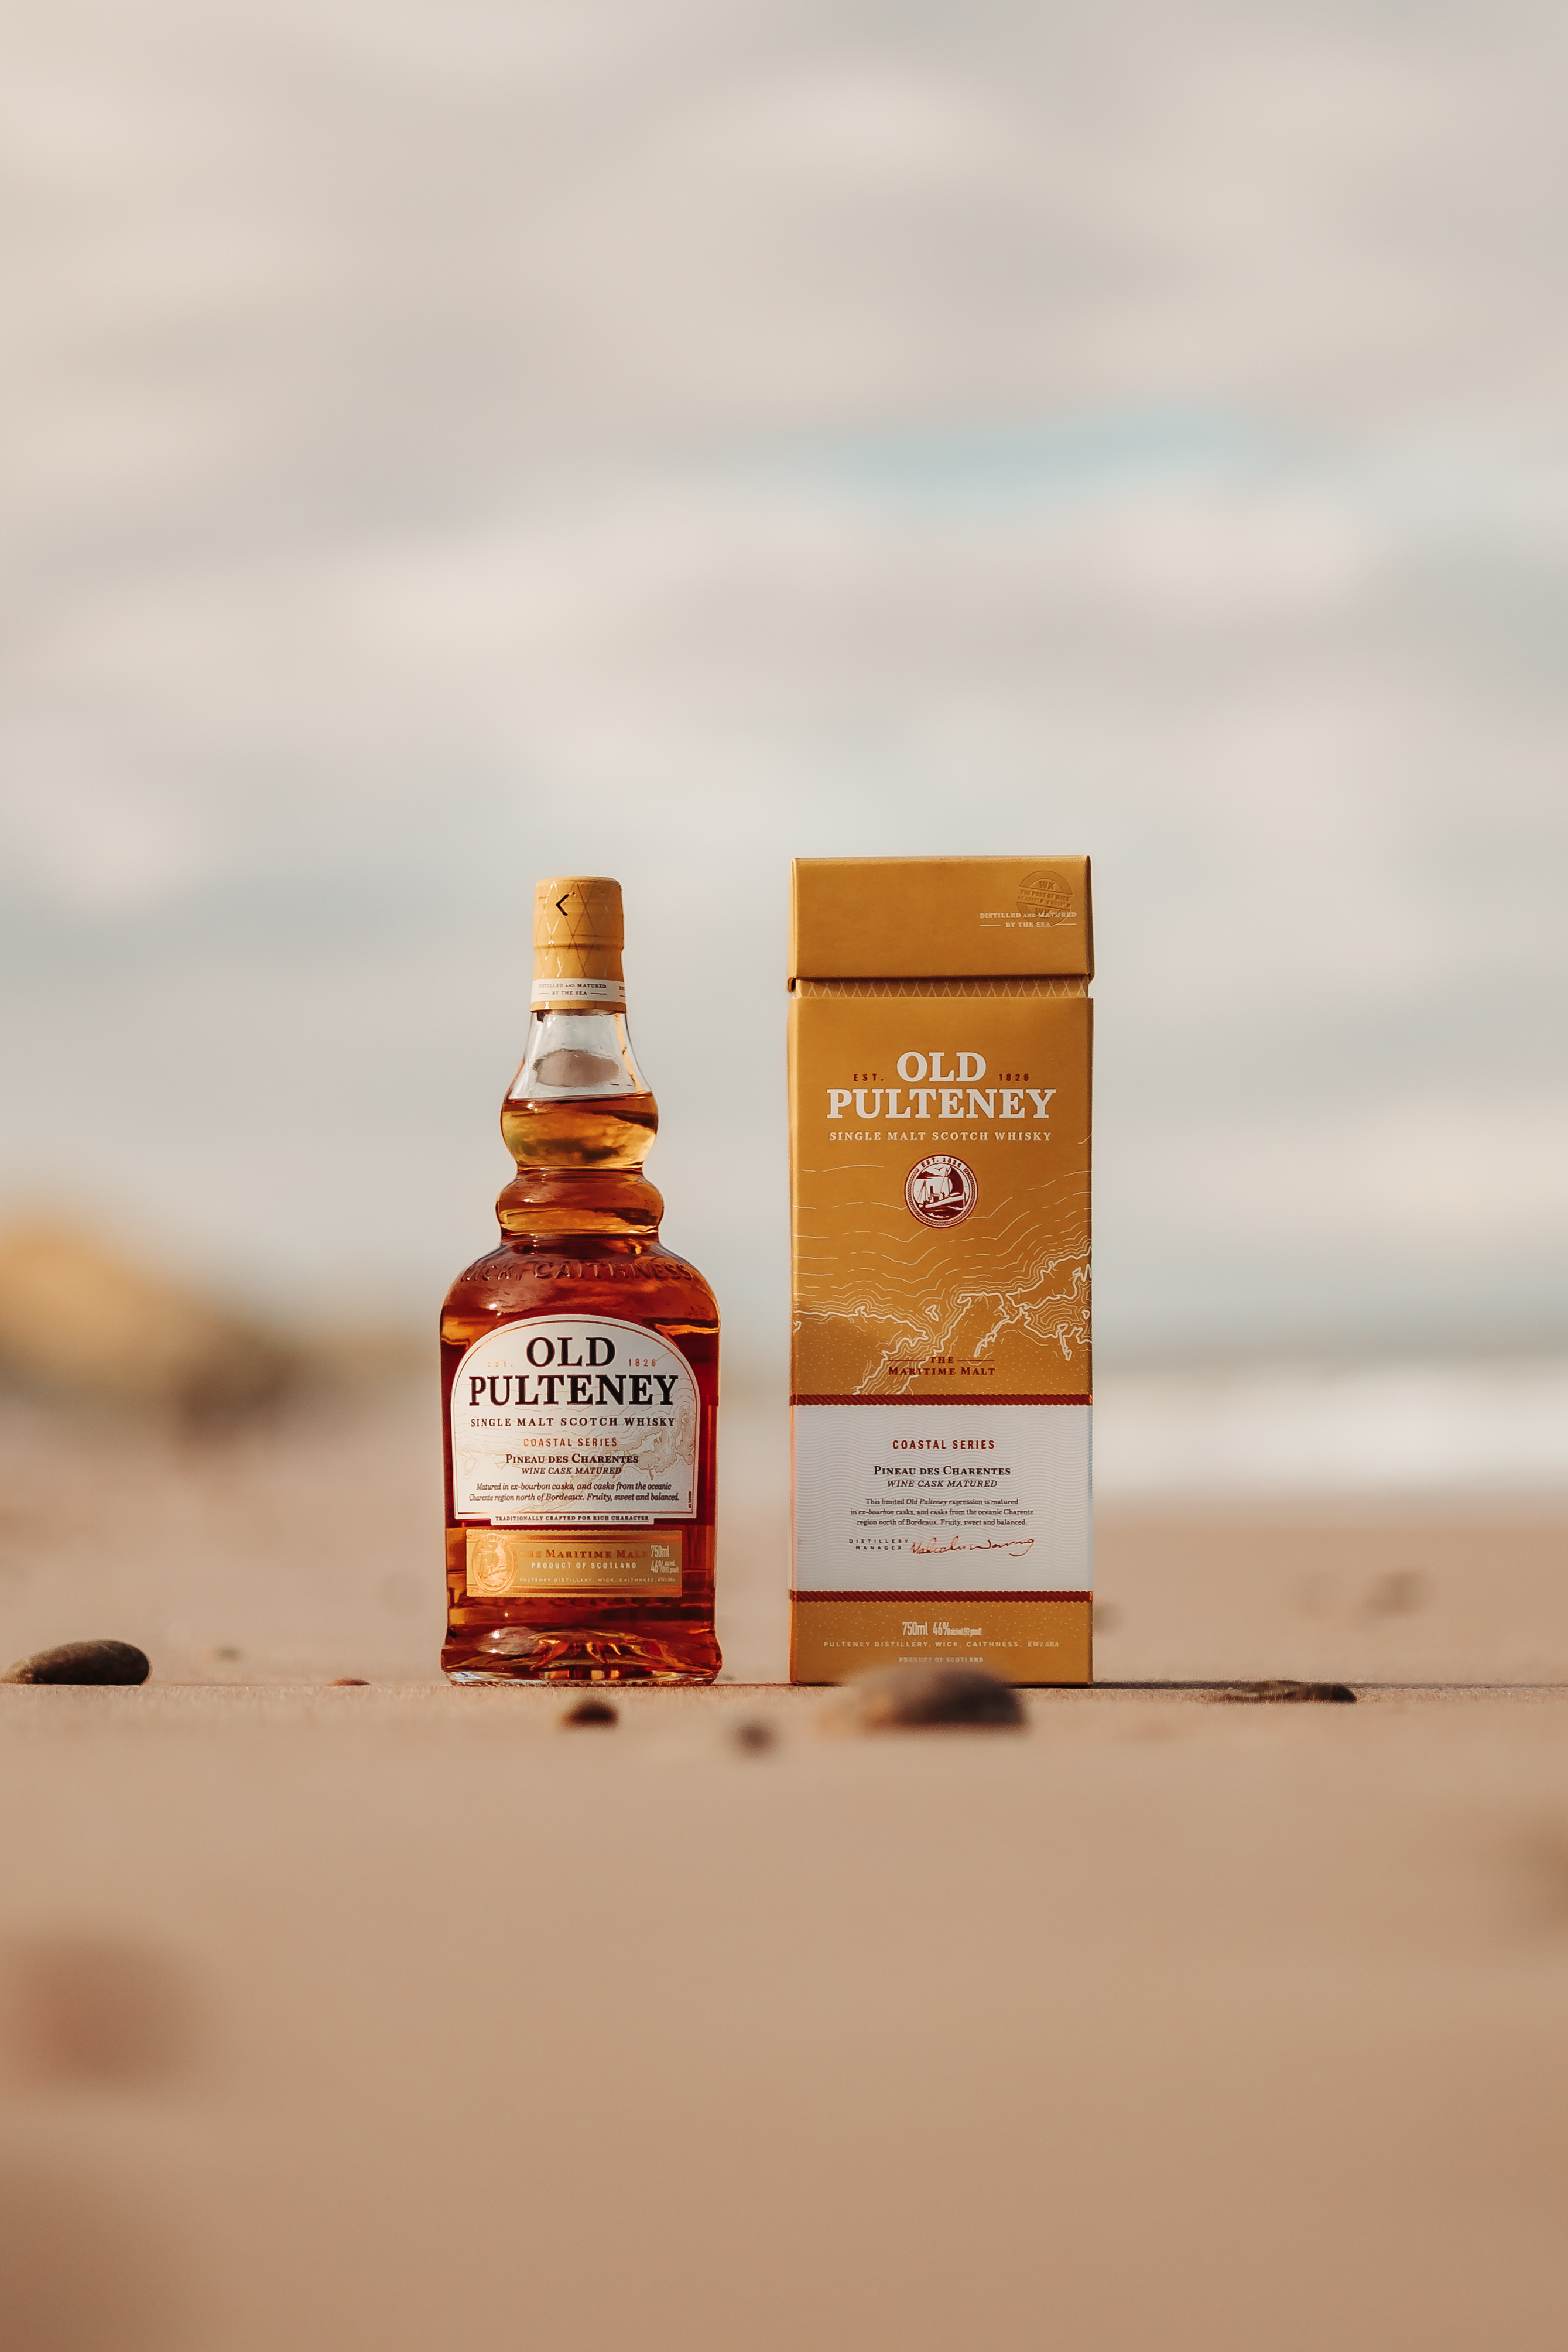 Old Pulteney To Release New Limited Collection Of Whisky